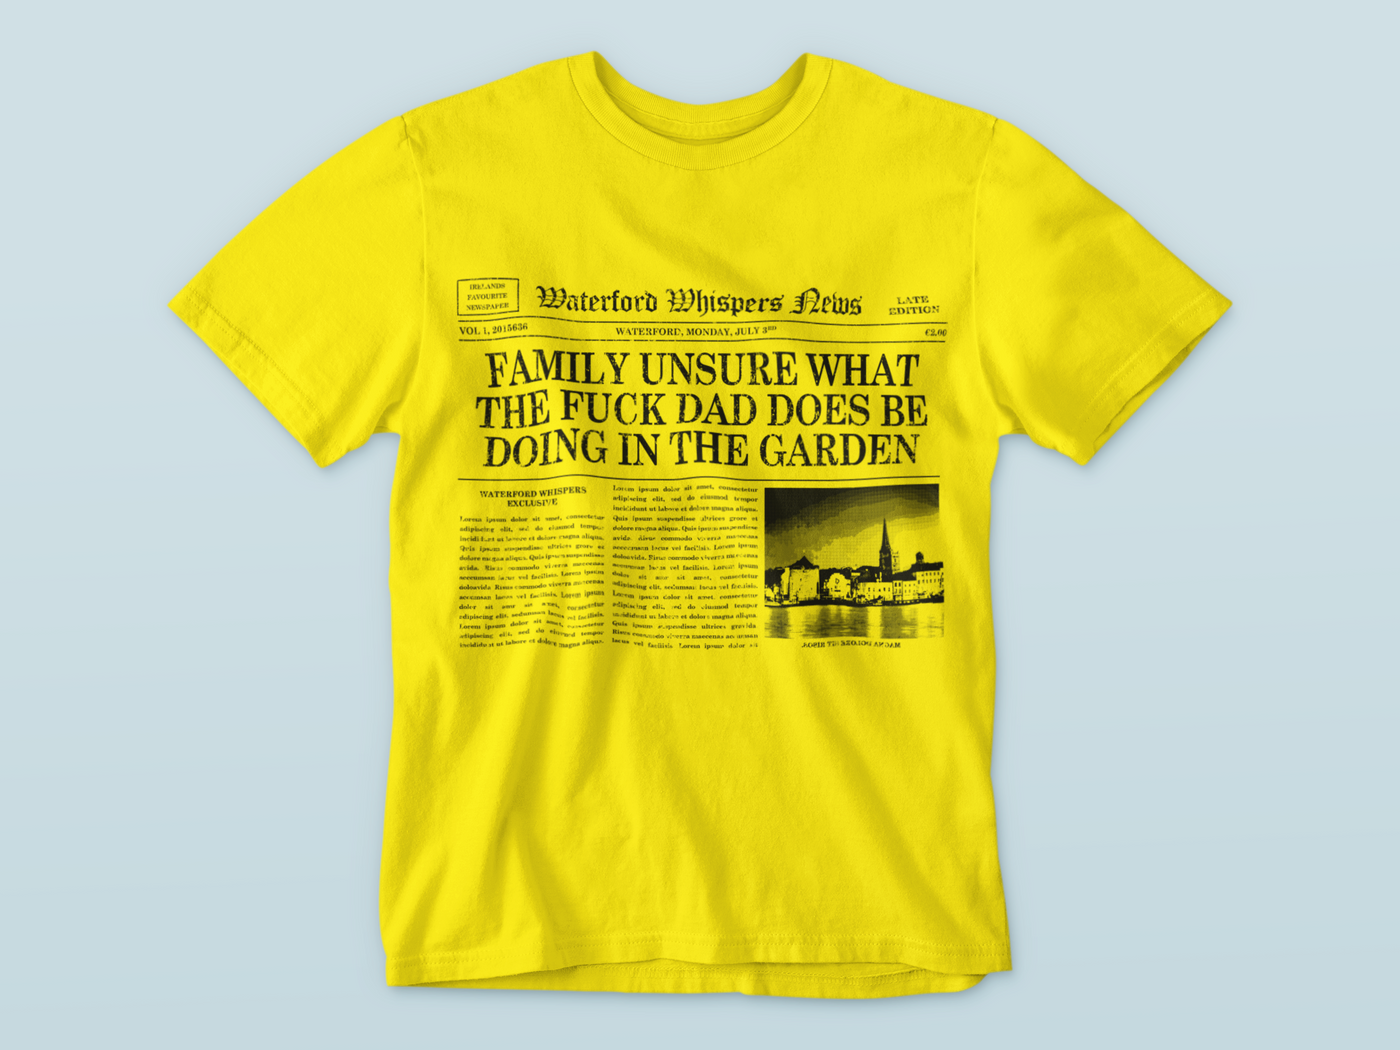 Family Unsure What The Fuck Dad Does Be Doing All Day In The Garden - Premium WWN T-shirt